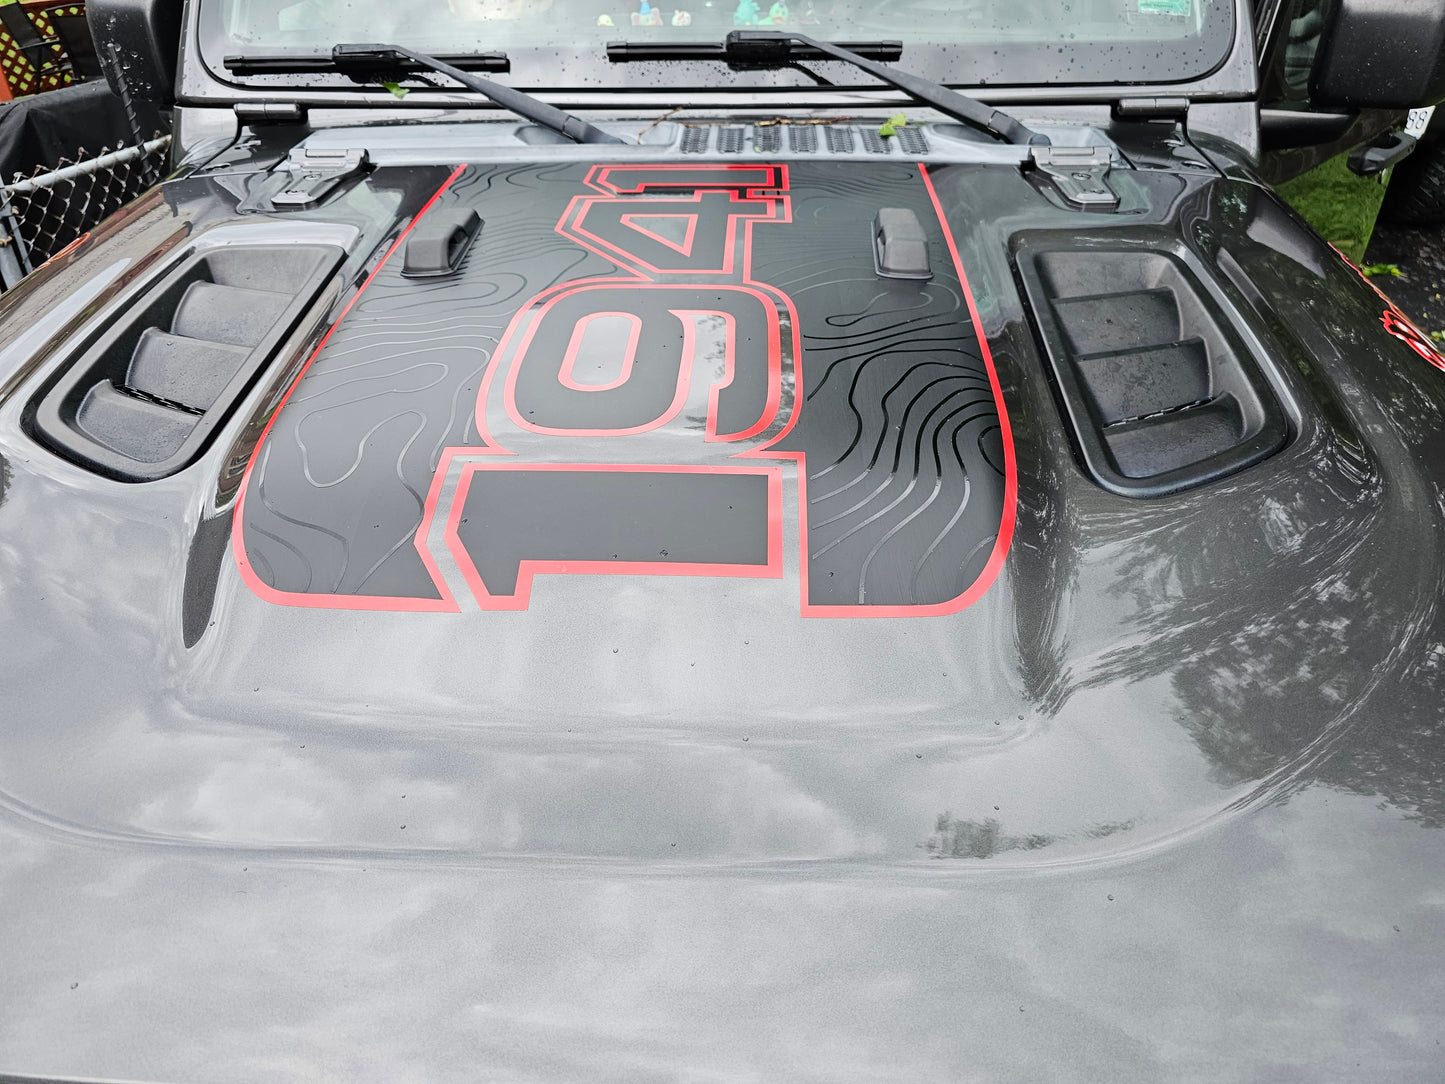 Open 1941 Topographical Red Line Rubicon Blackout Hood Decal- Fits Jeep Wrangler & Gladiator JL Hood Decal (3 Pieces)